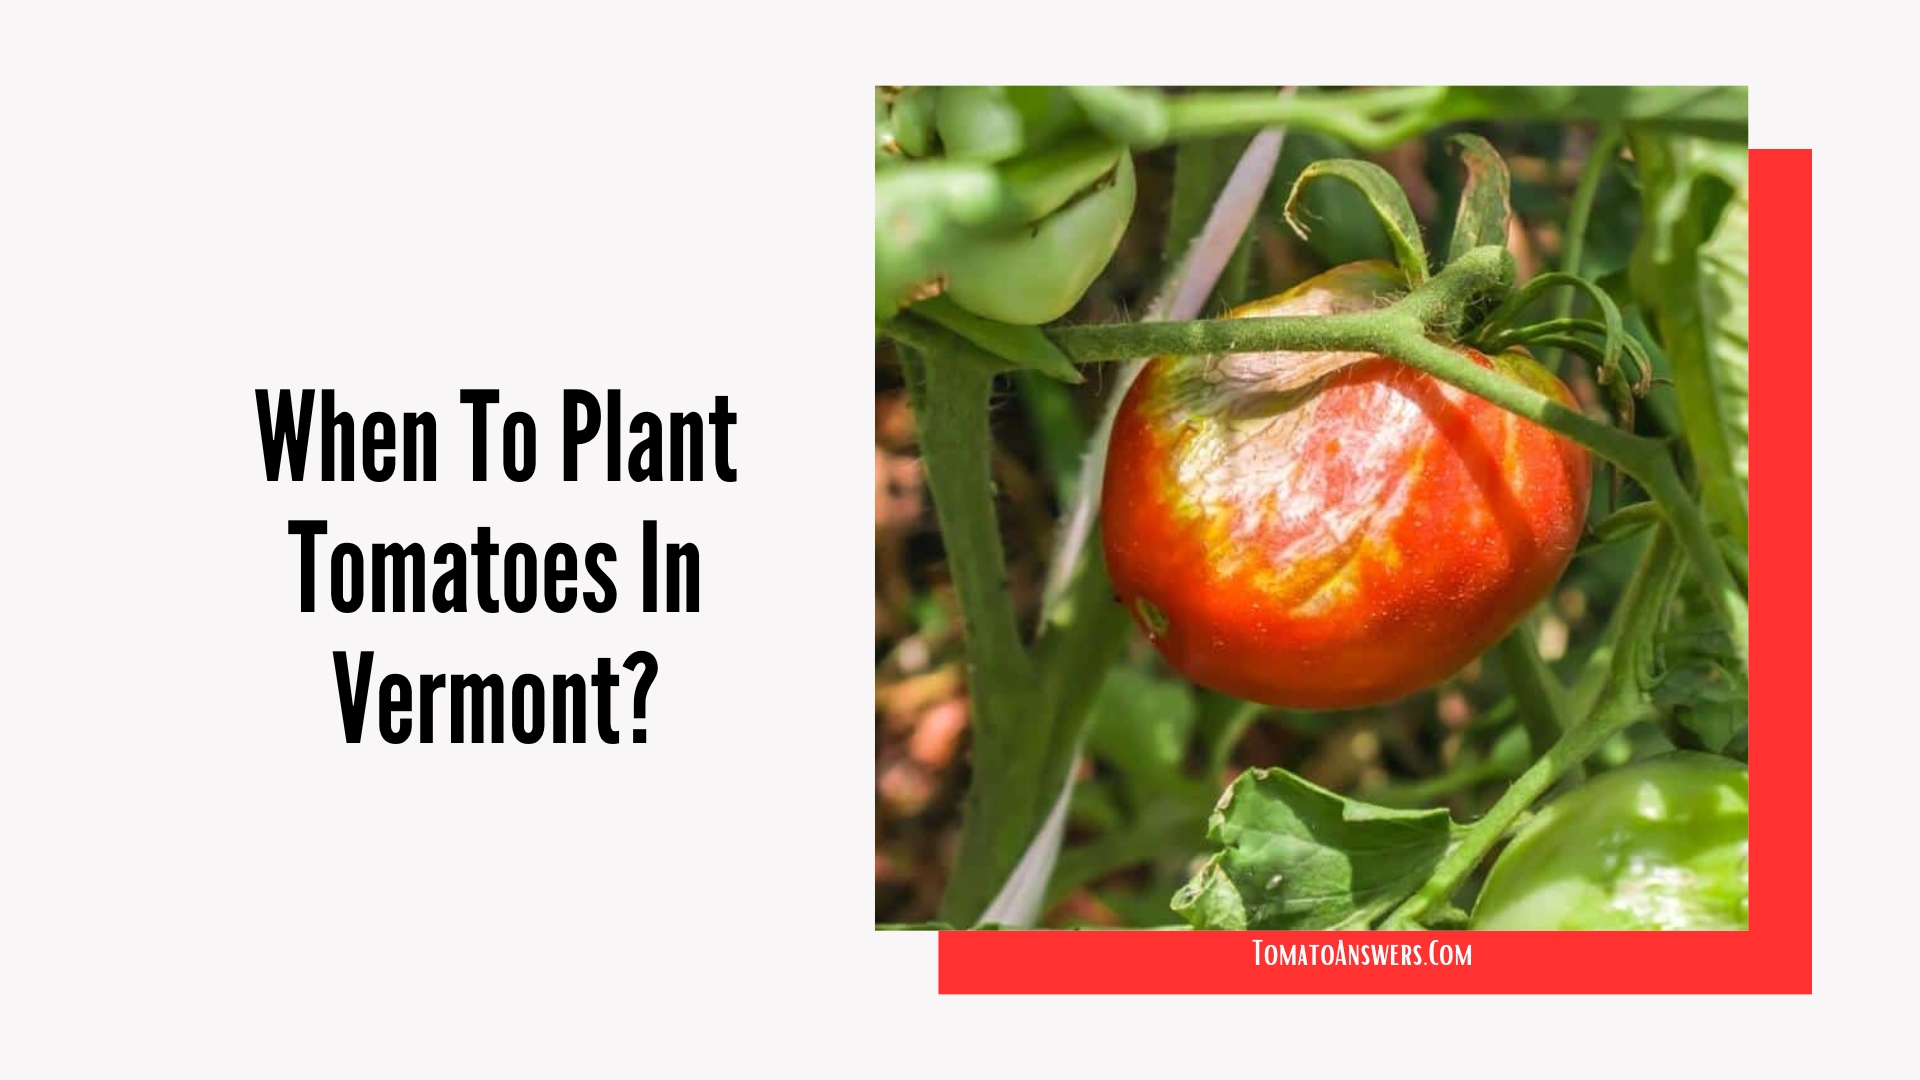 When To Plant Tomatoes In Vermont